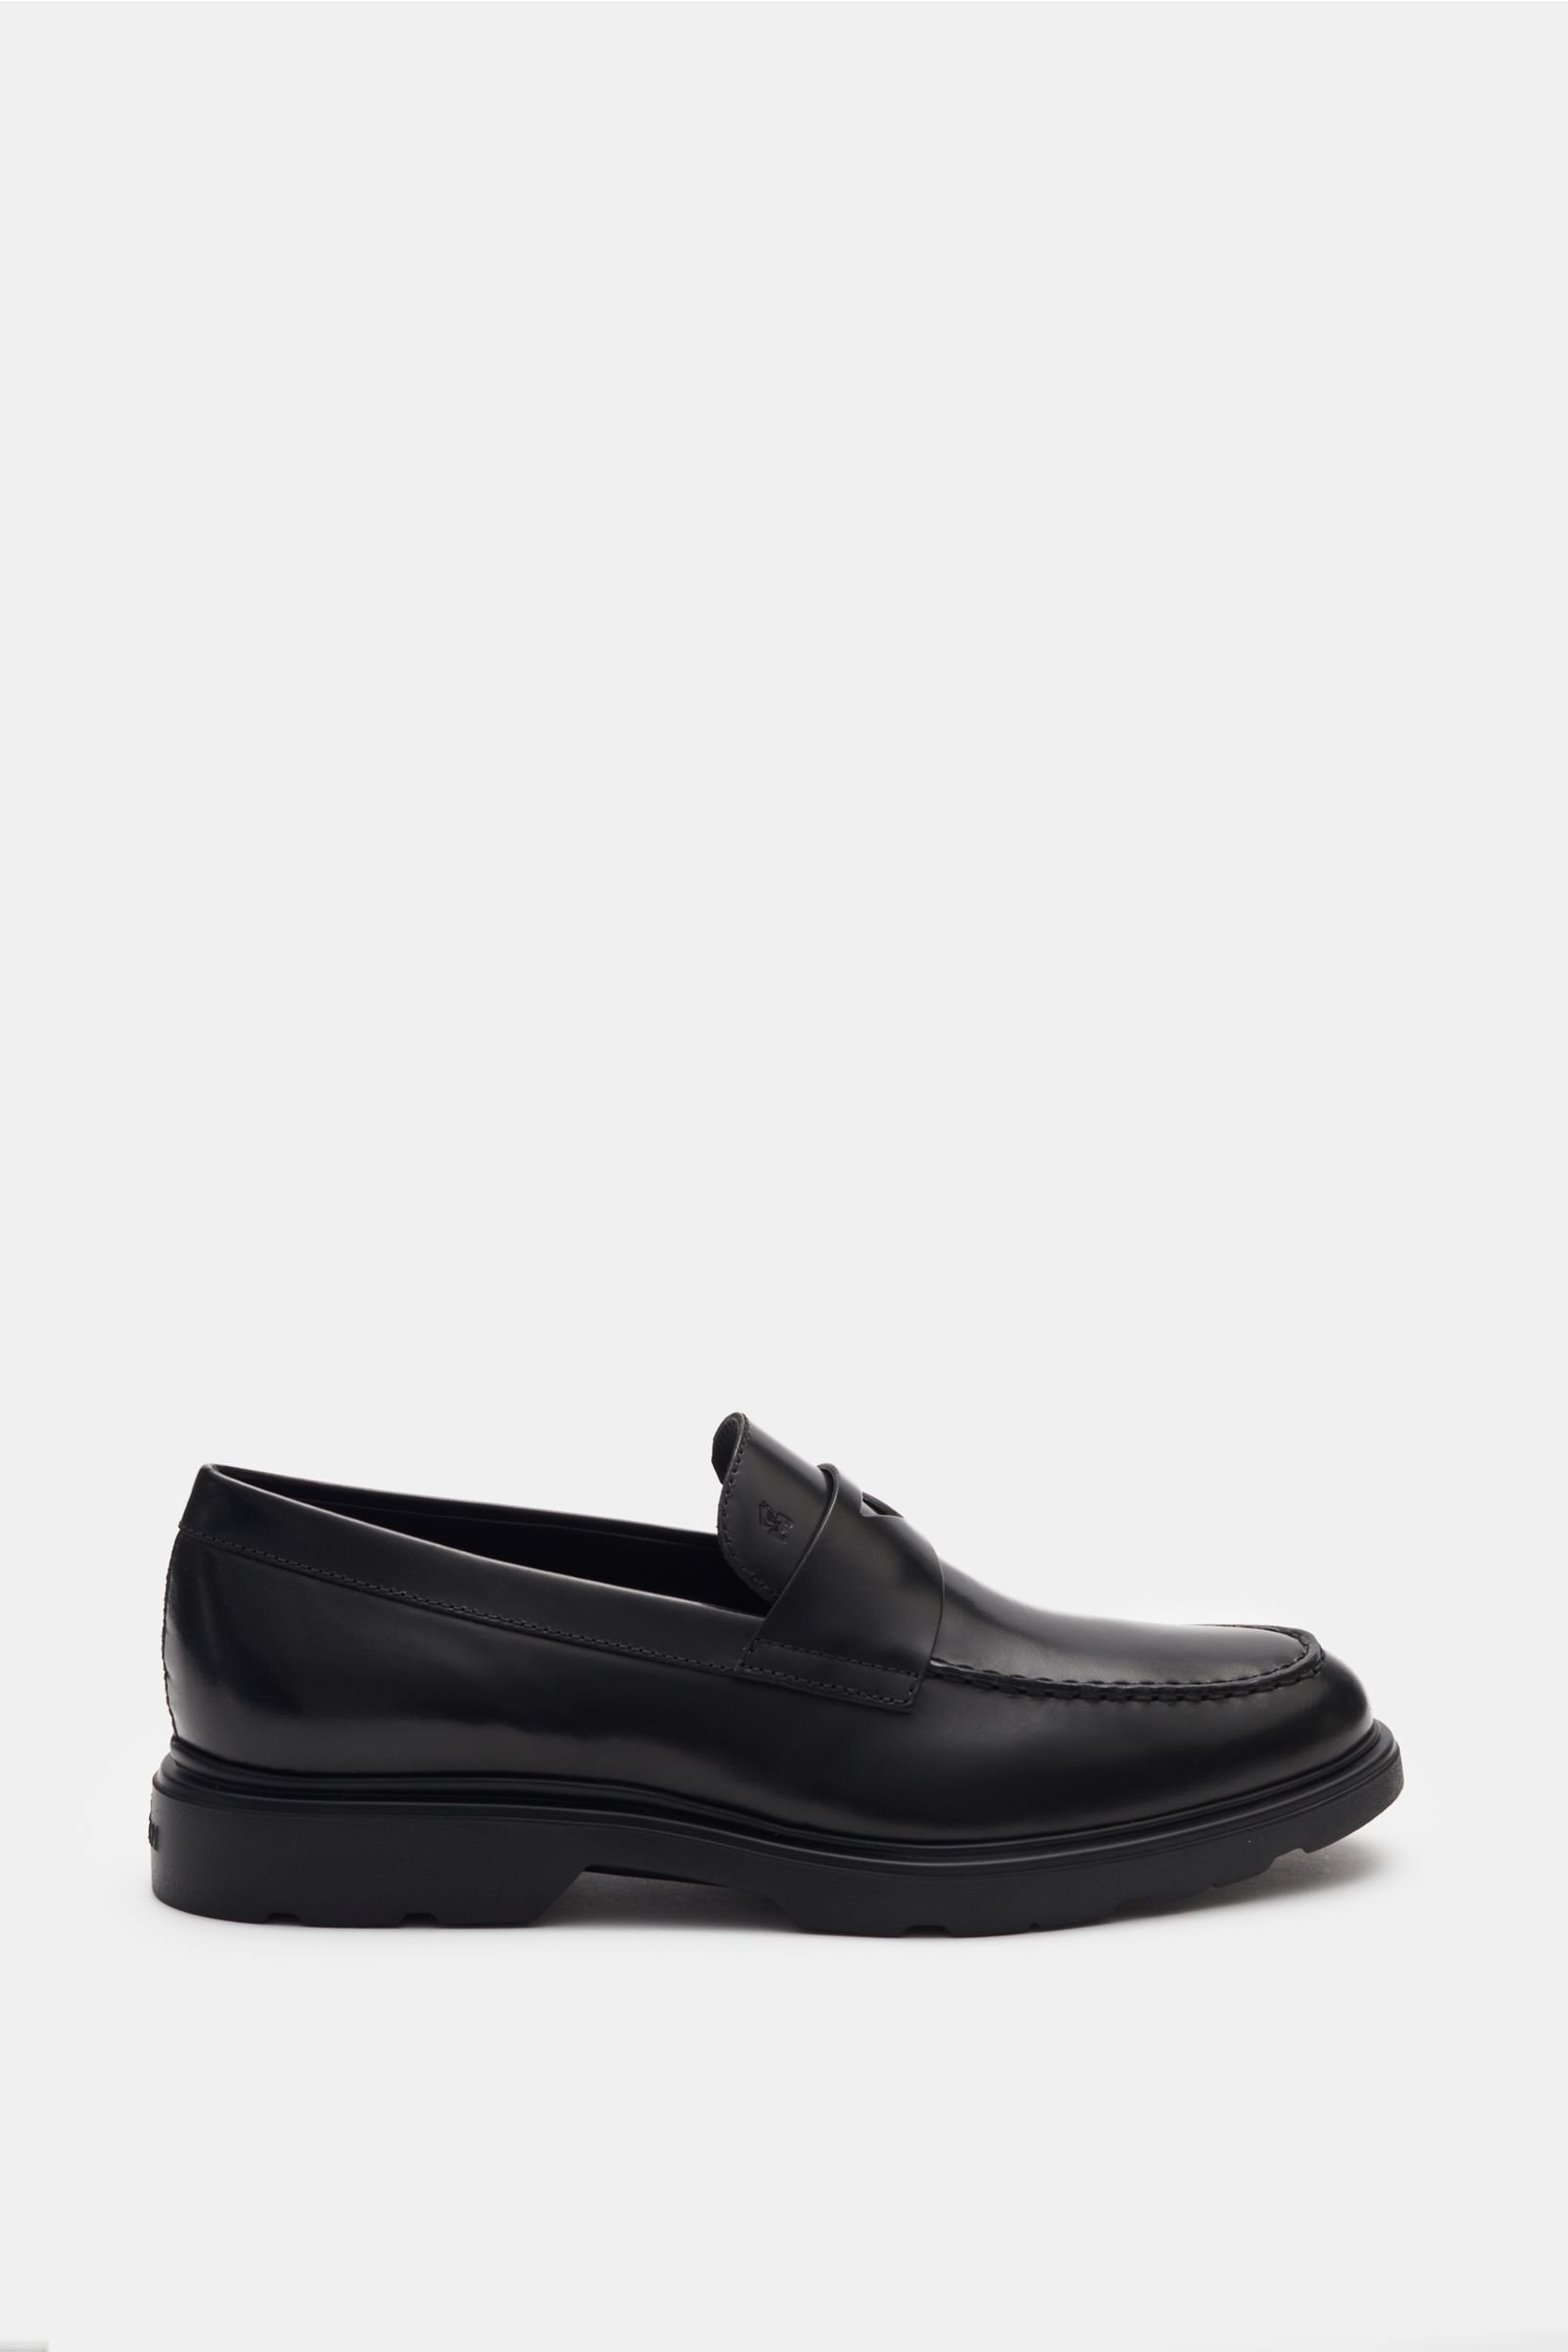 Penny loafers 'H393' black